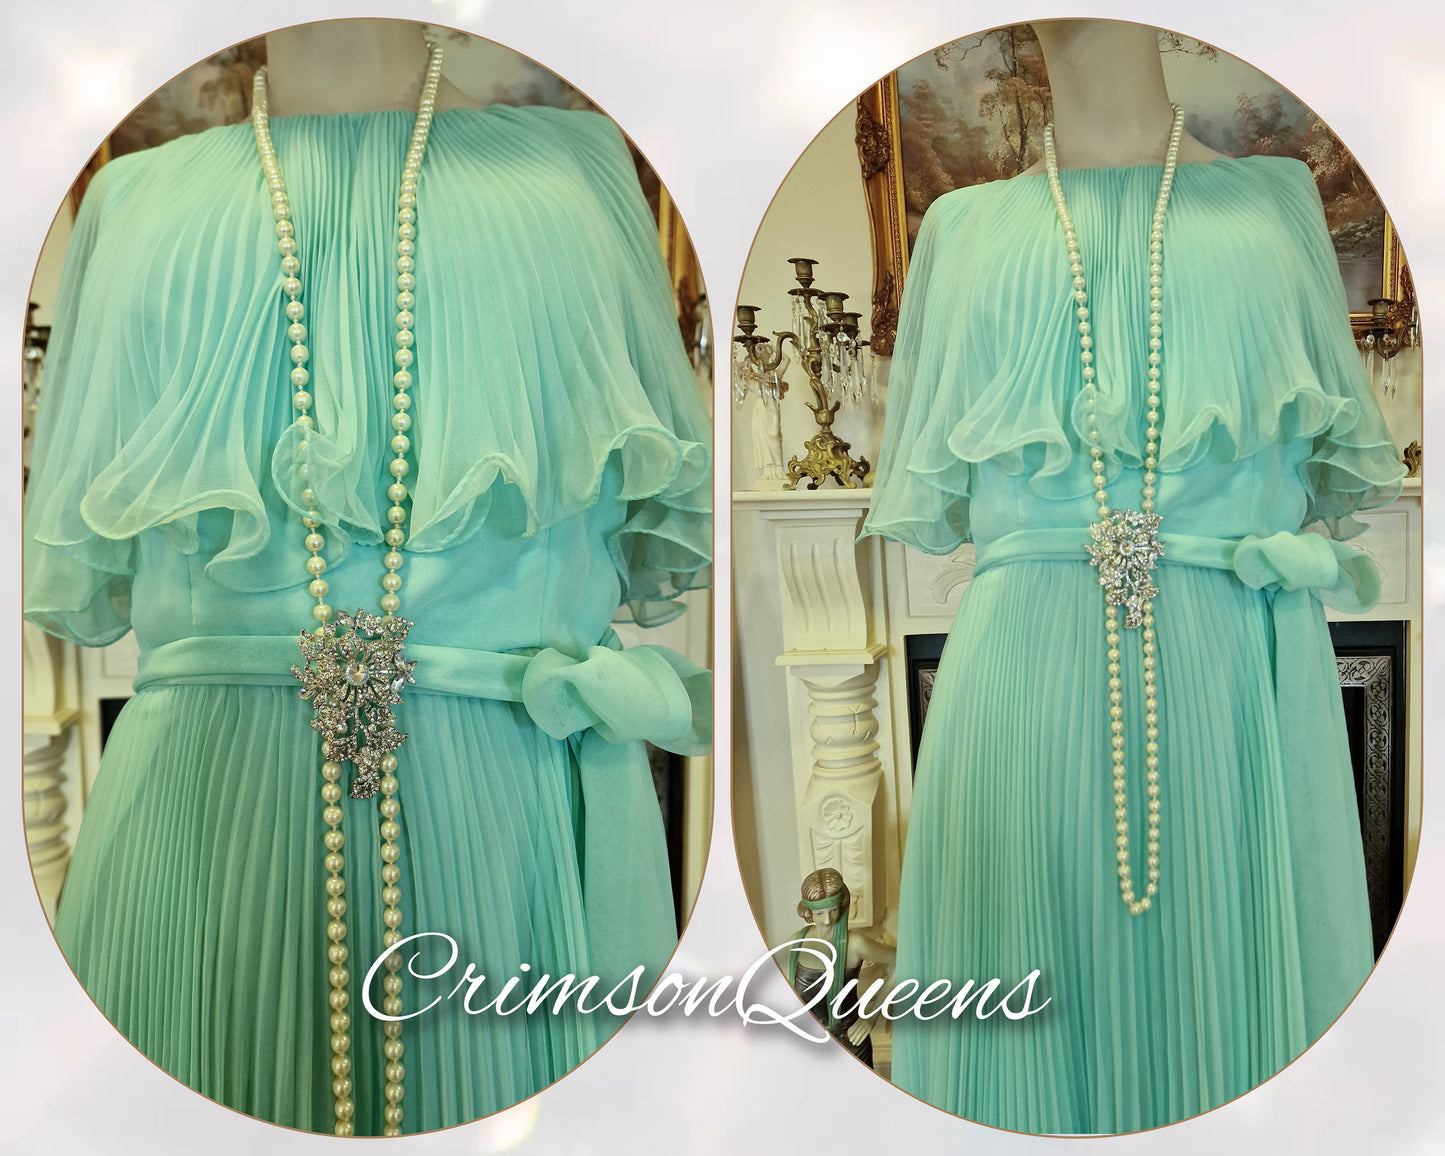 Vintage silk  mint aqua green 1920's style ethereal floaty frilly ethereal  summer cocktail garden flapper style dress size US 10  US 6